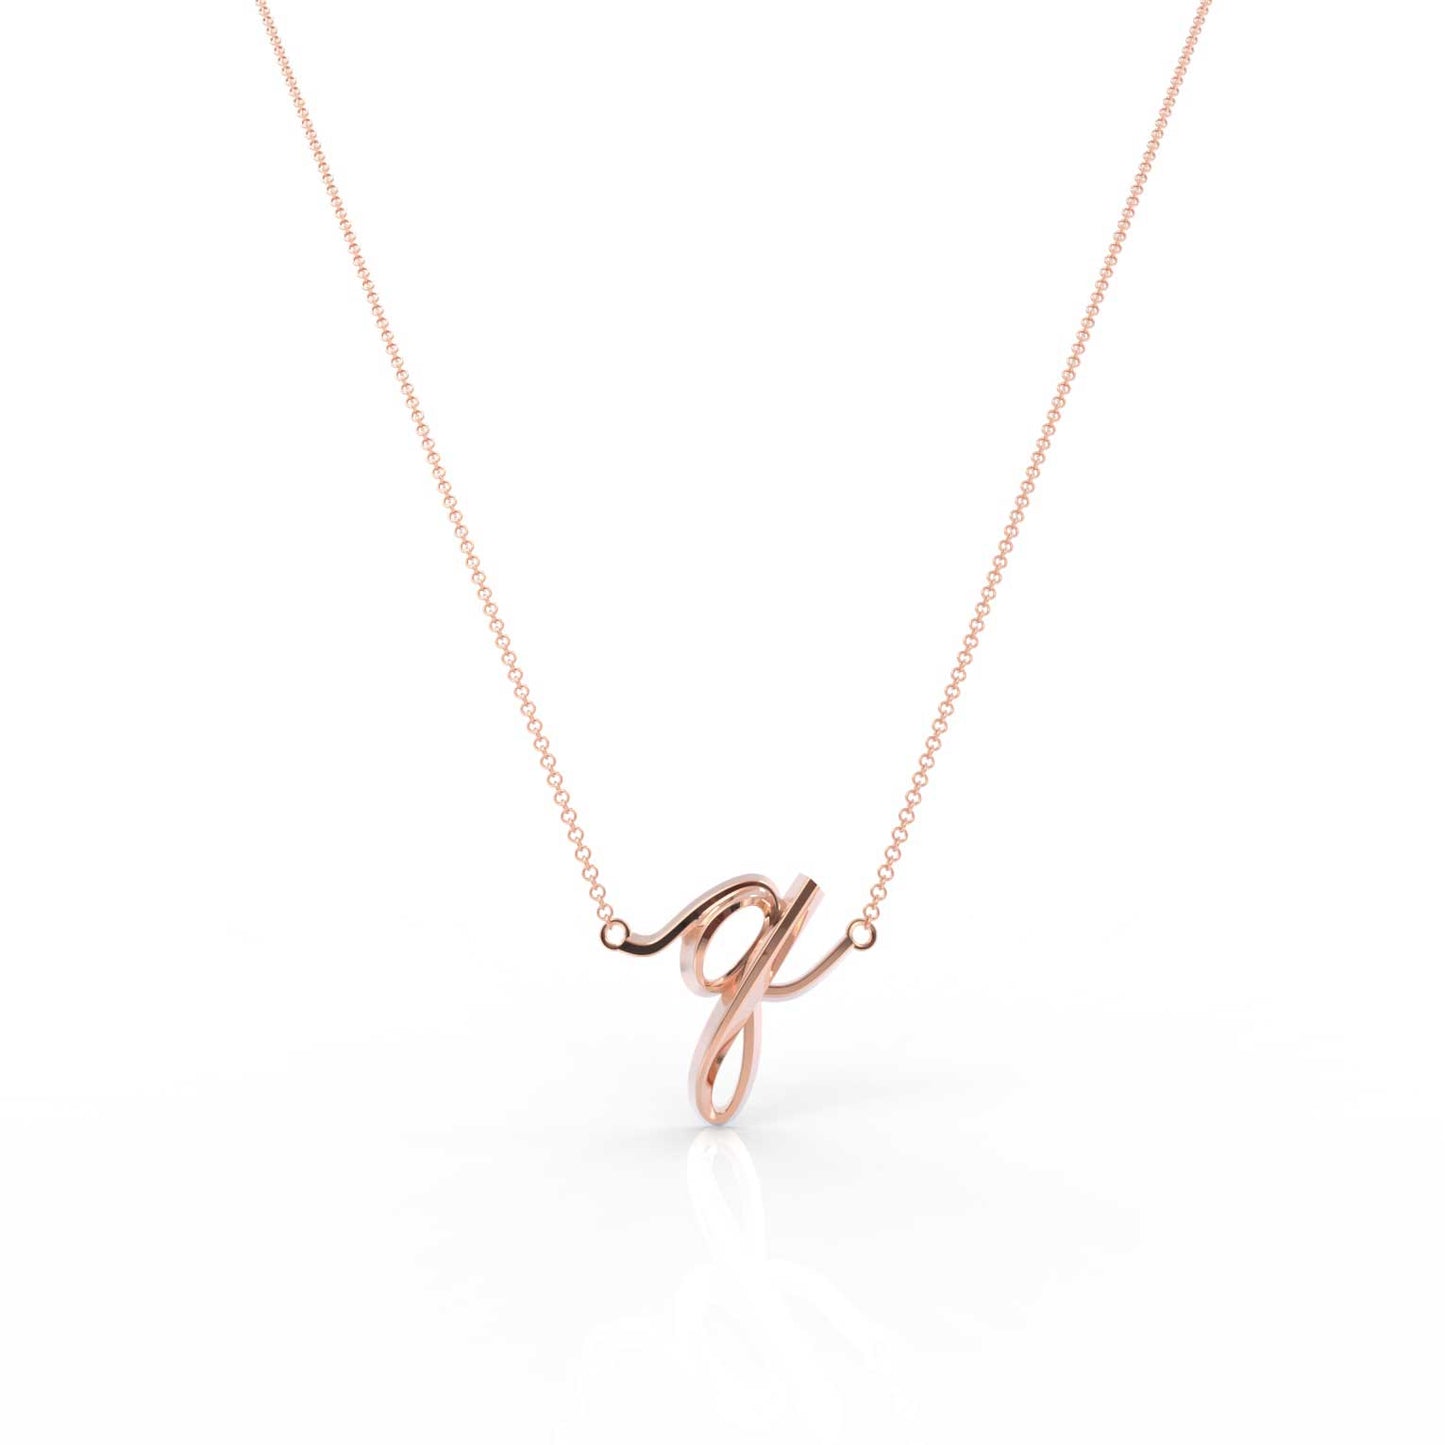 The Love Collect - "Q" Necklace